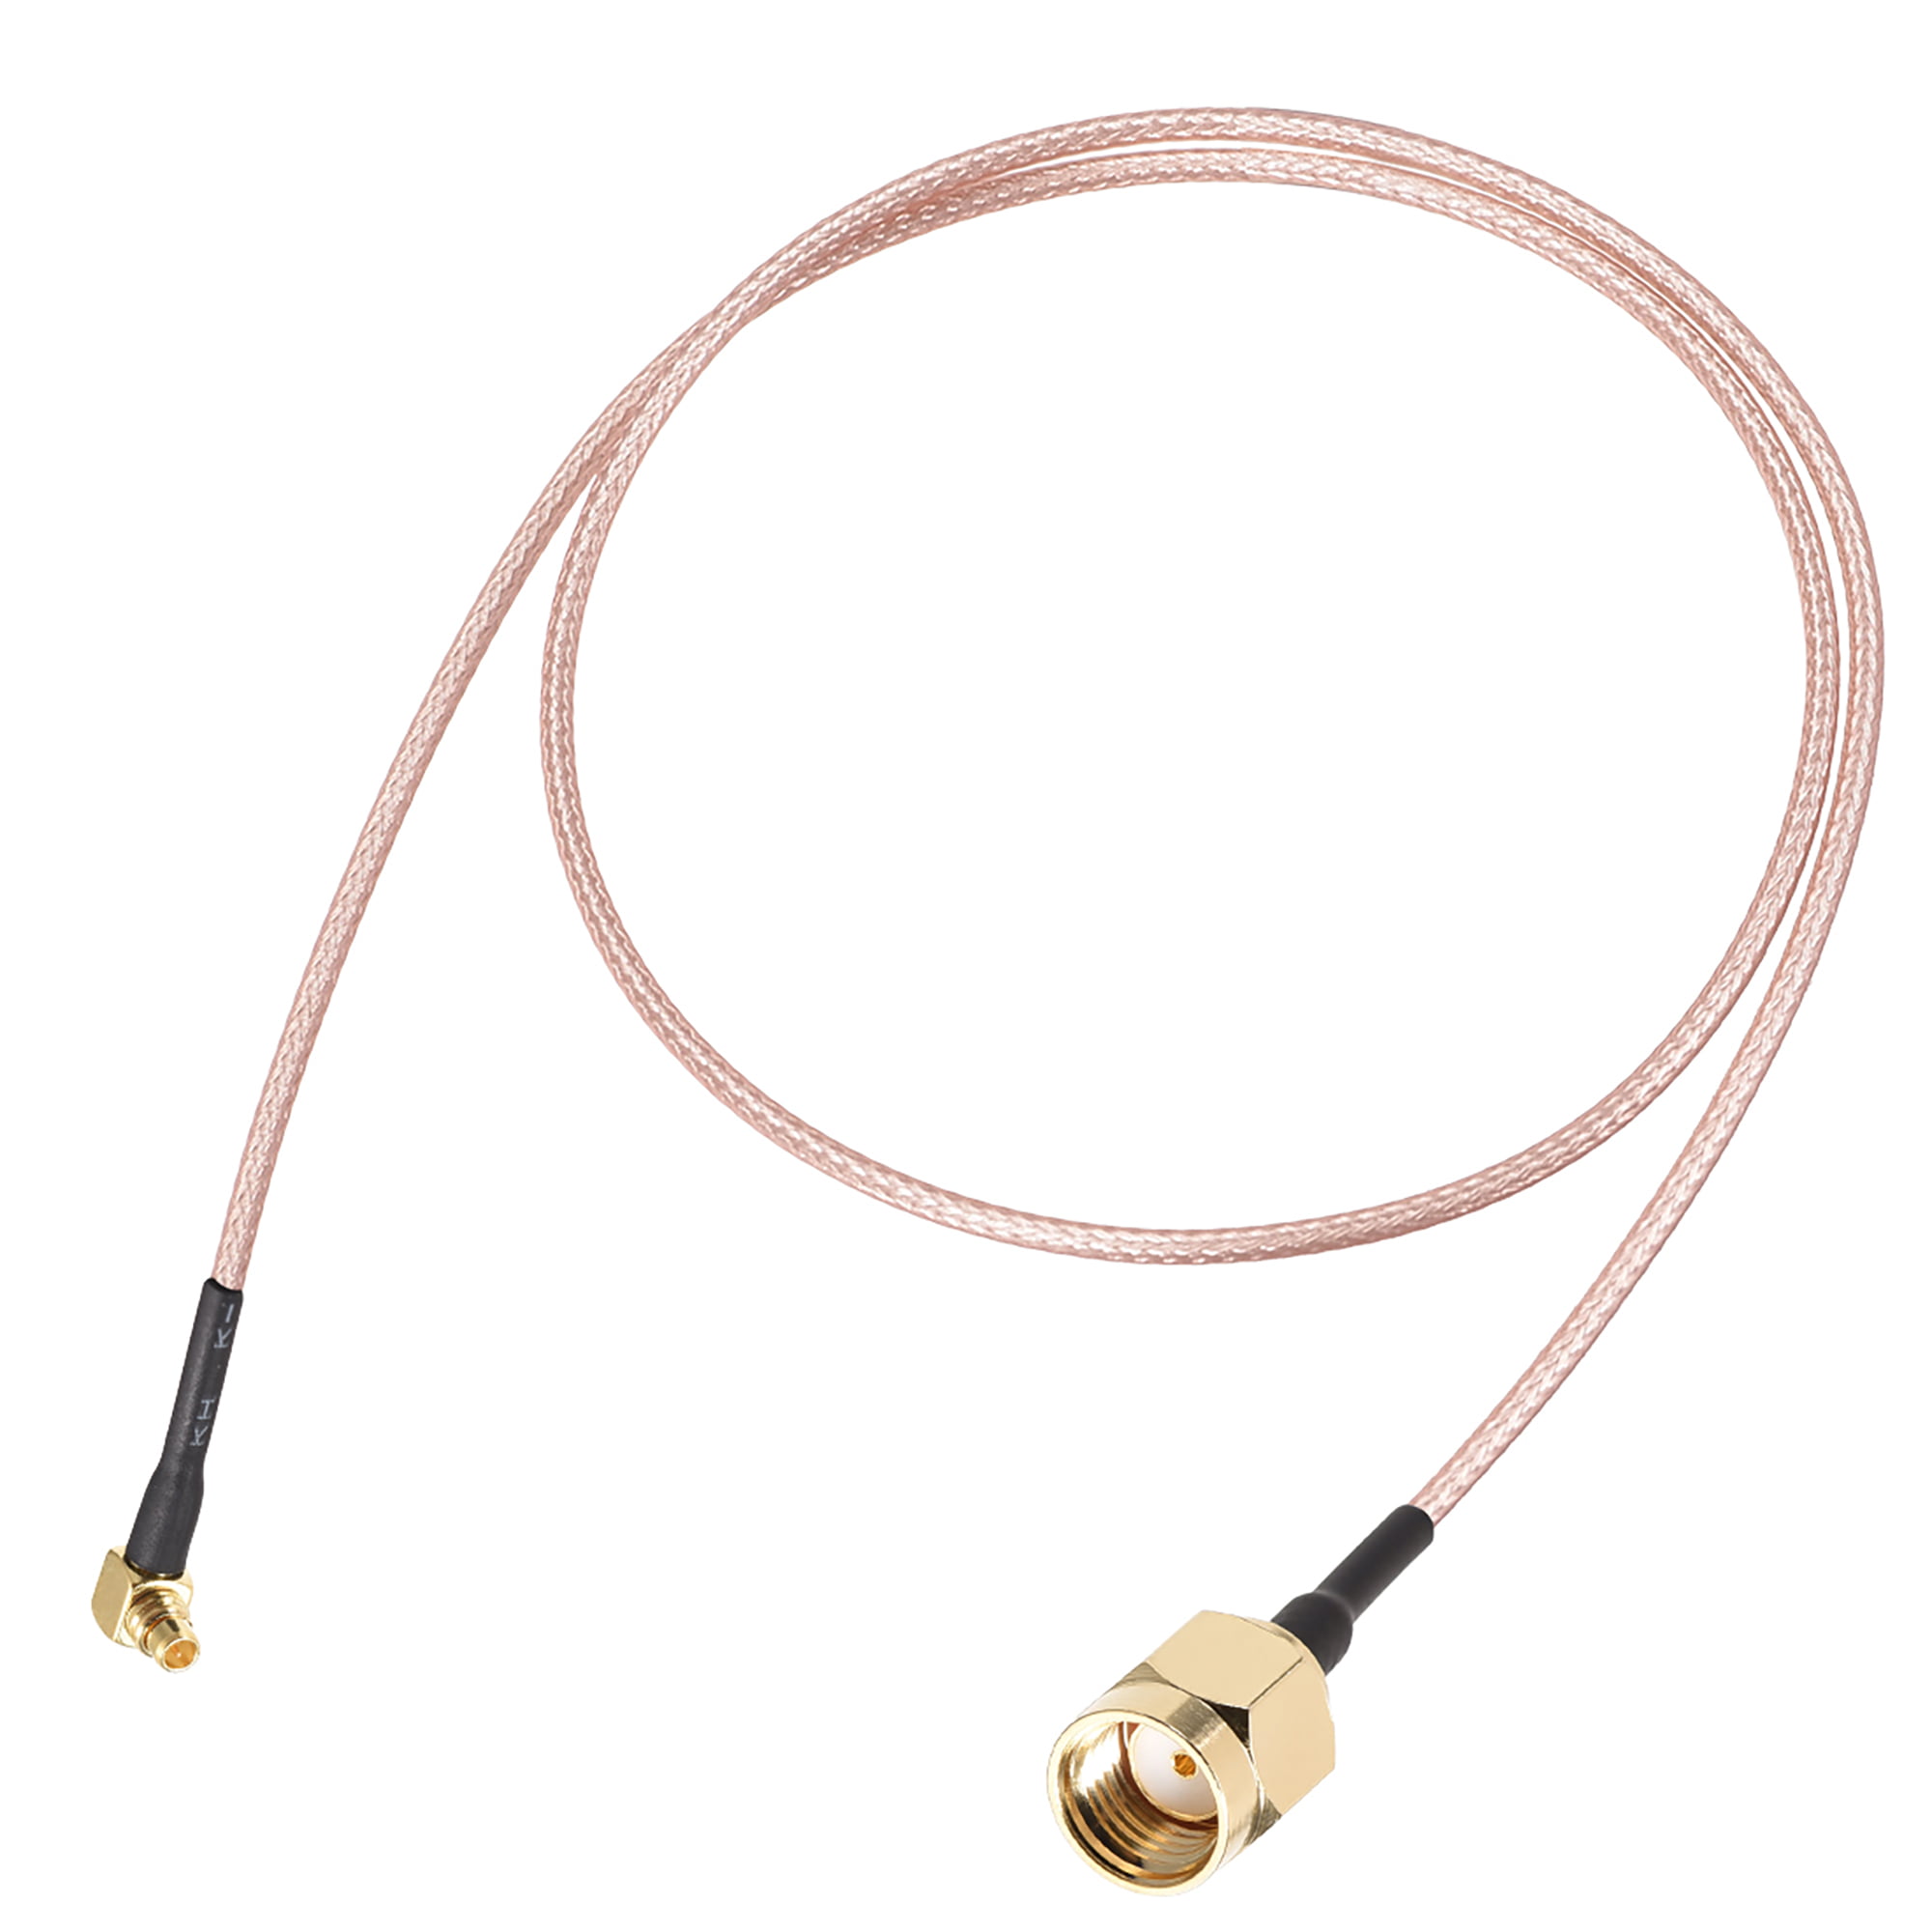 uxcell MMCX Male Right Angle to RP-SMA Female Bulkhead,Pigtail Antenna Coaxial RF1.37 Cable,RF Coaxial Connector,8inch,4pcs